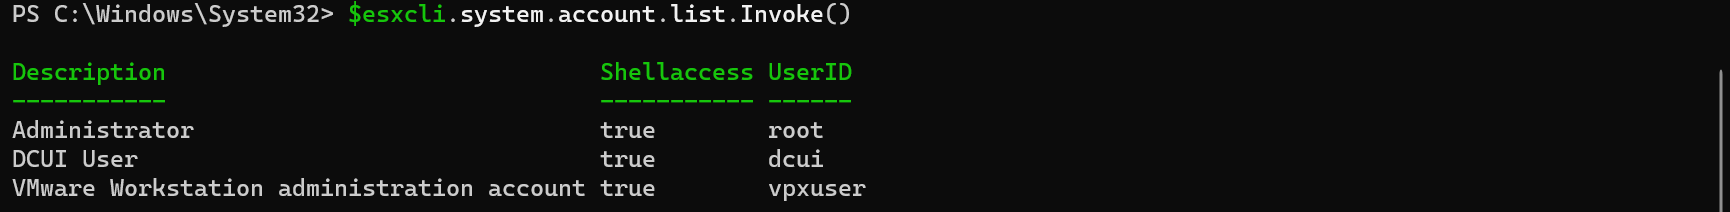 Screenshot showing the output of the $esxcli.system.account.list.Invoke() PowerCLI command